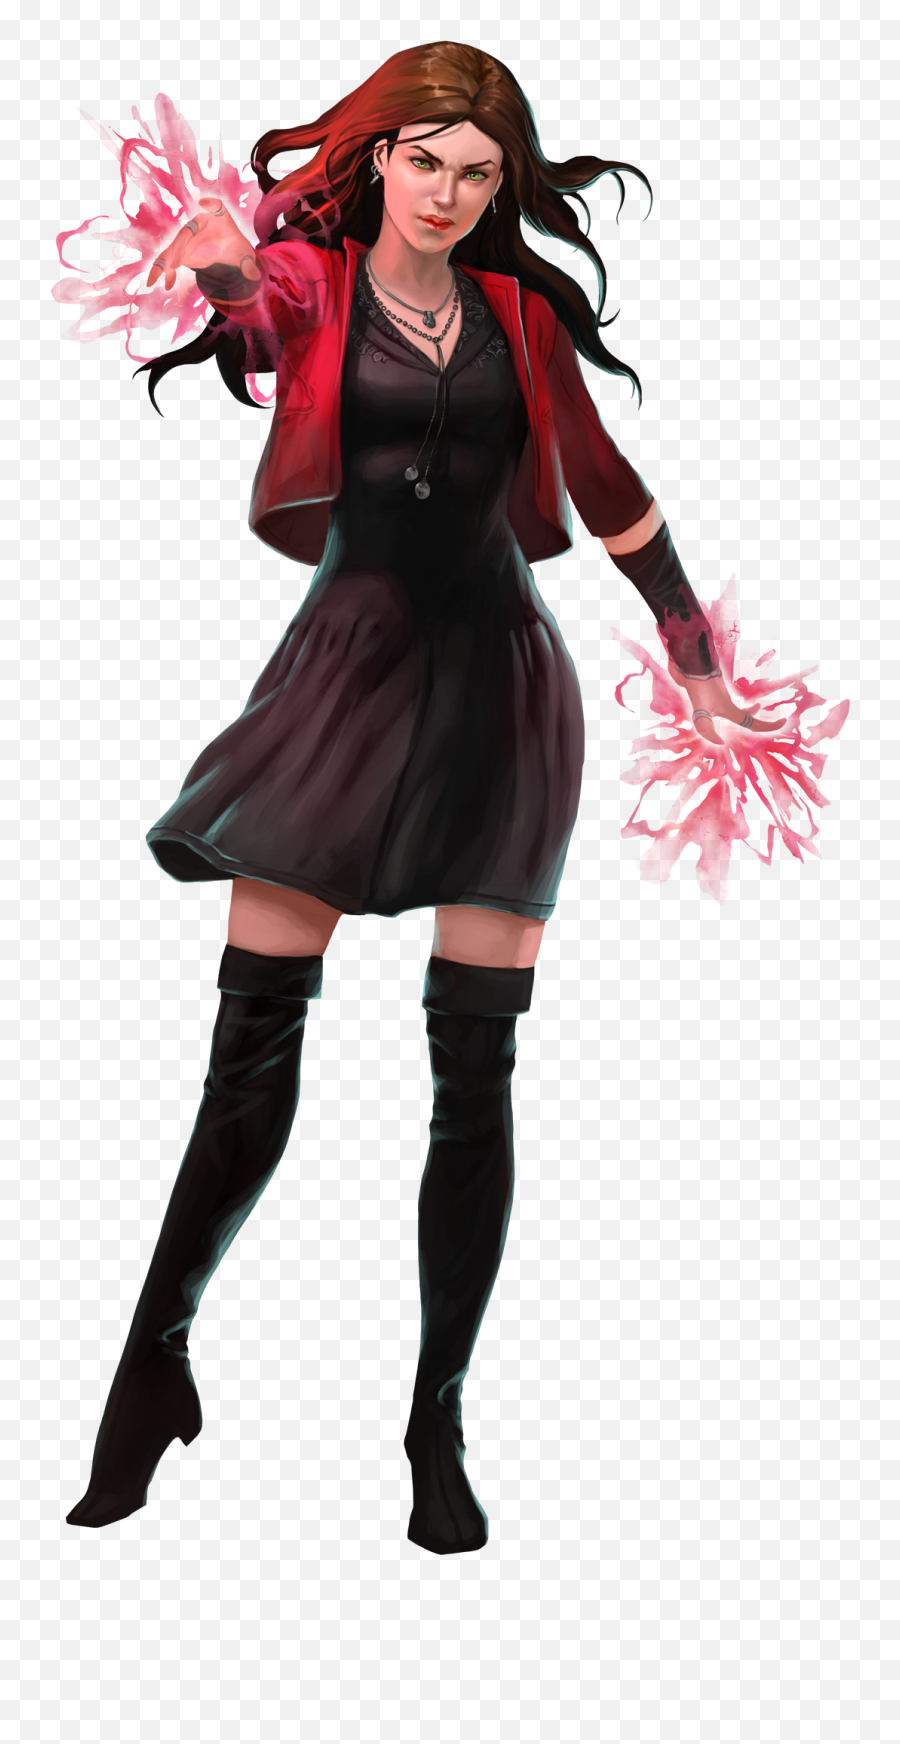 Download Scarlet Witch Png Clipart - Avengers Wanda Maximoff Cartoon,Scarlet  Witch Transparent - free transparent png images 